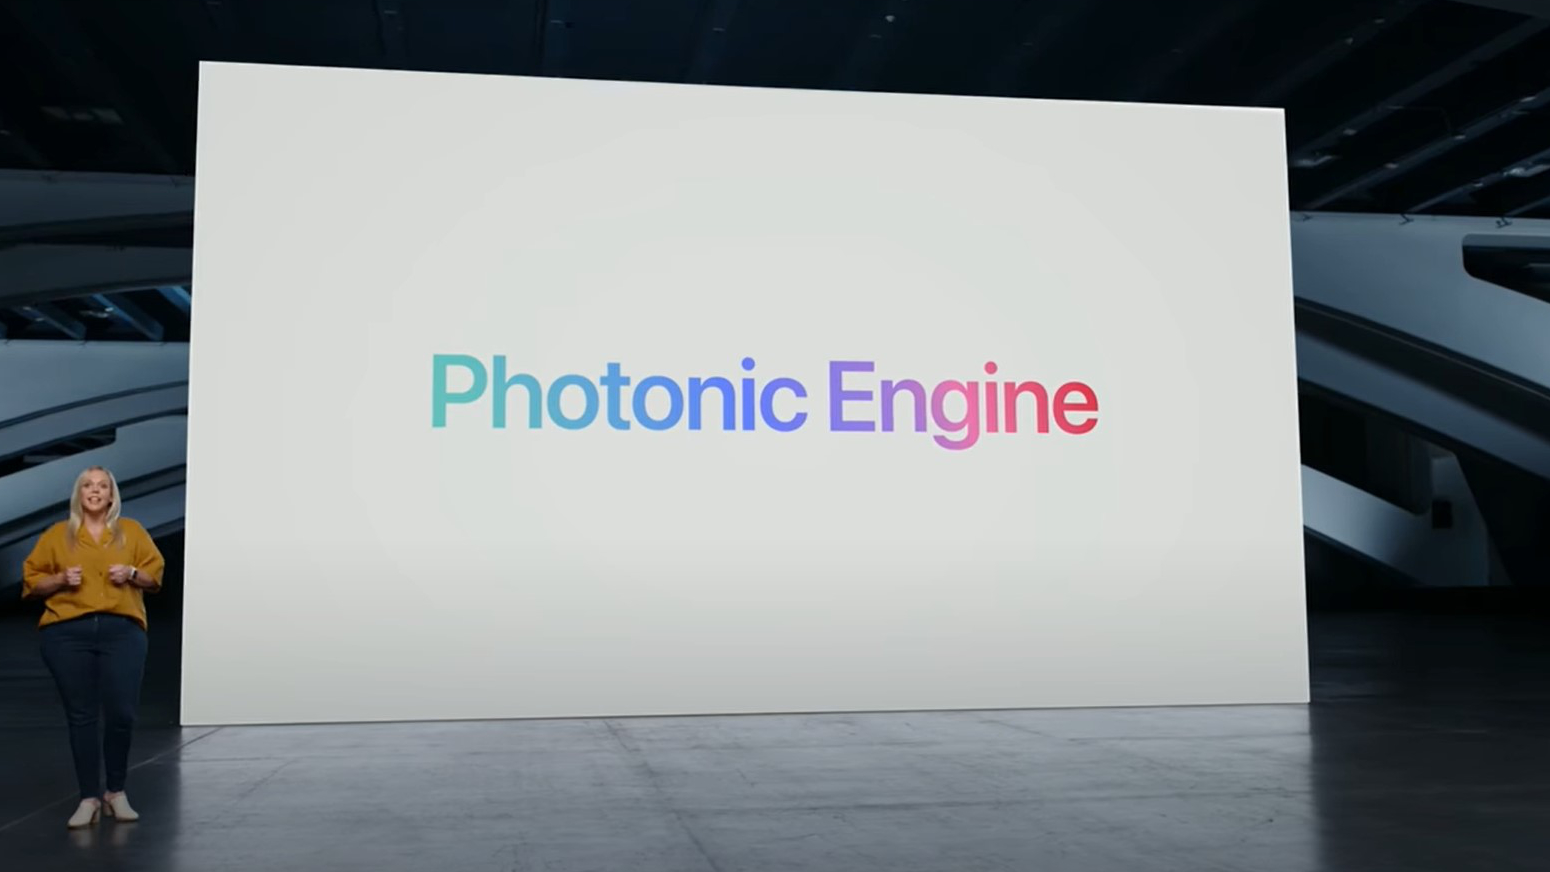 Screenshot of the name of the photon engine